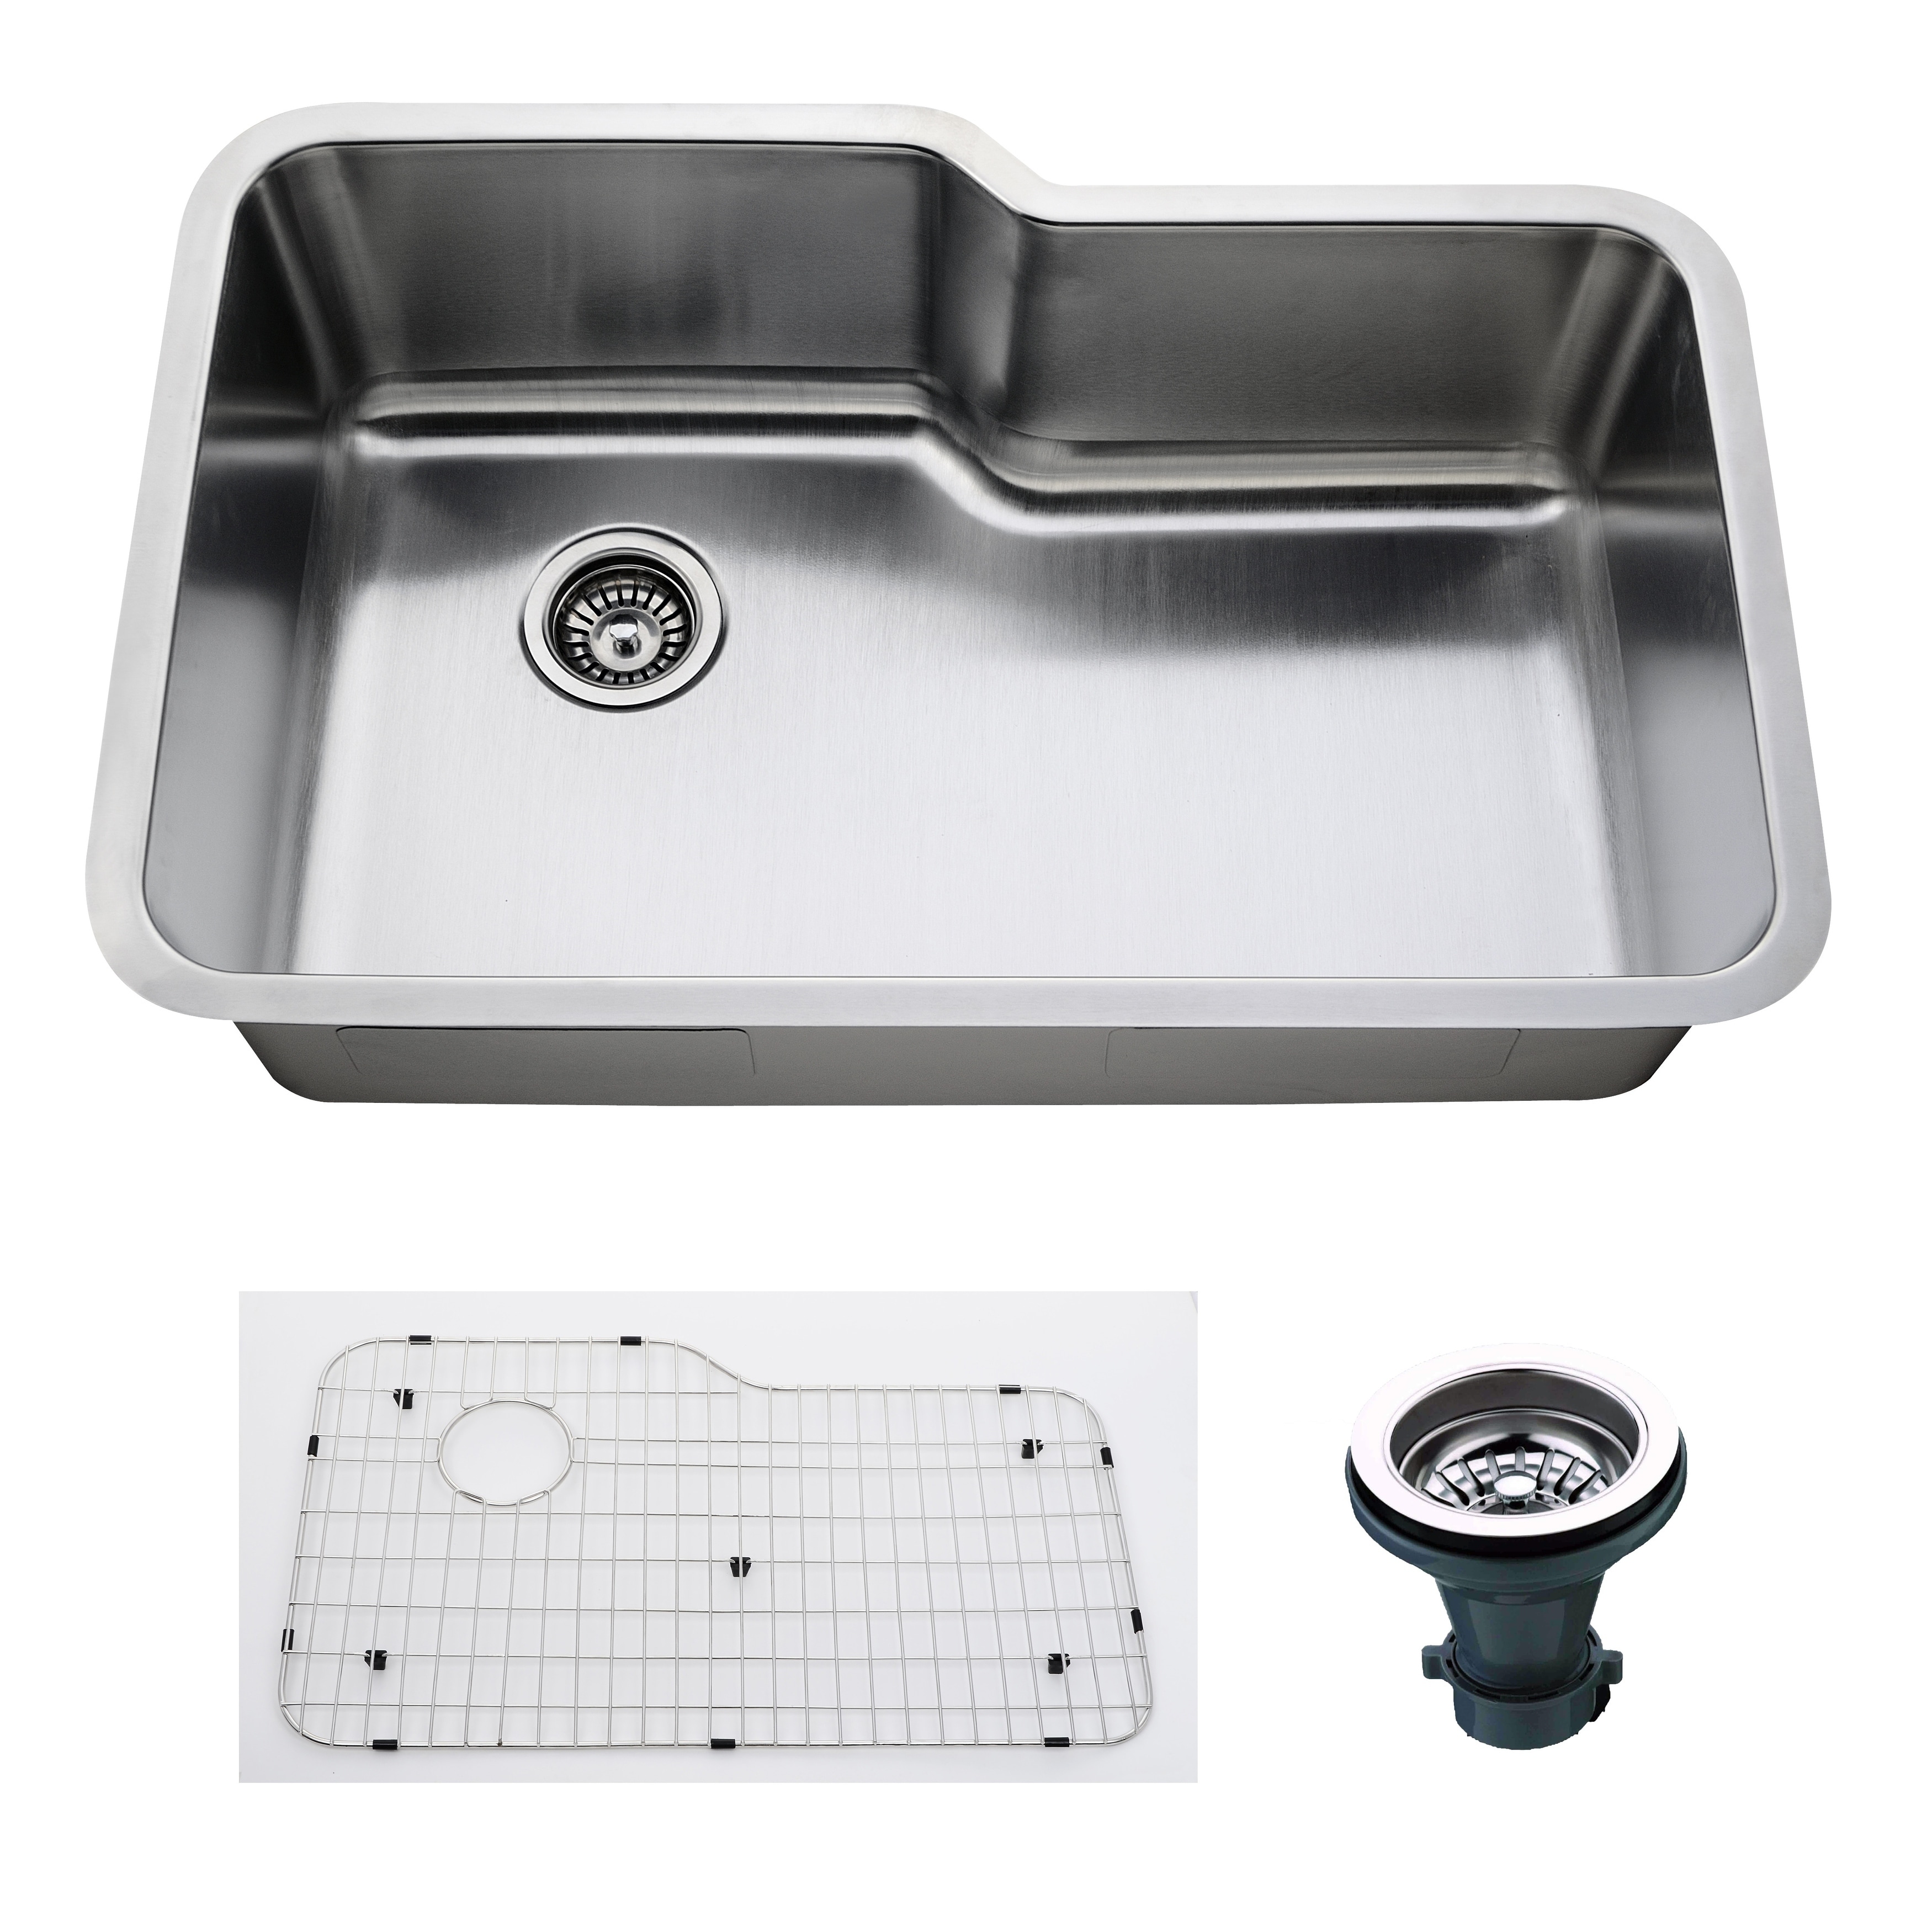 Empire 32 Inch Undermount Single Bowl 16 Gauge Stainless Steel Kitchen Sink With Soundproofing